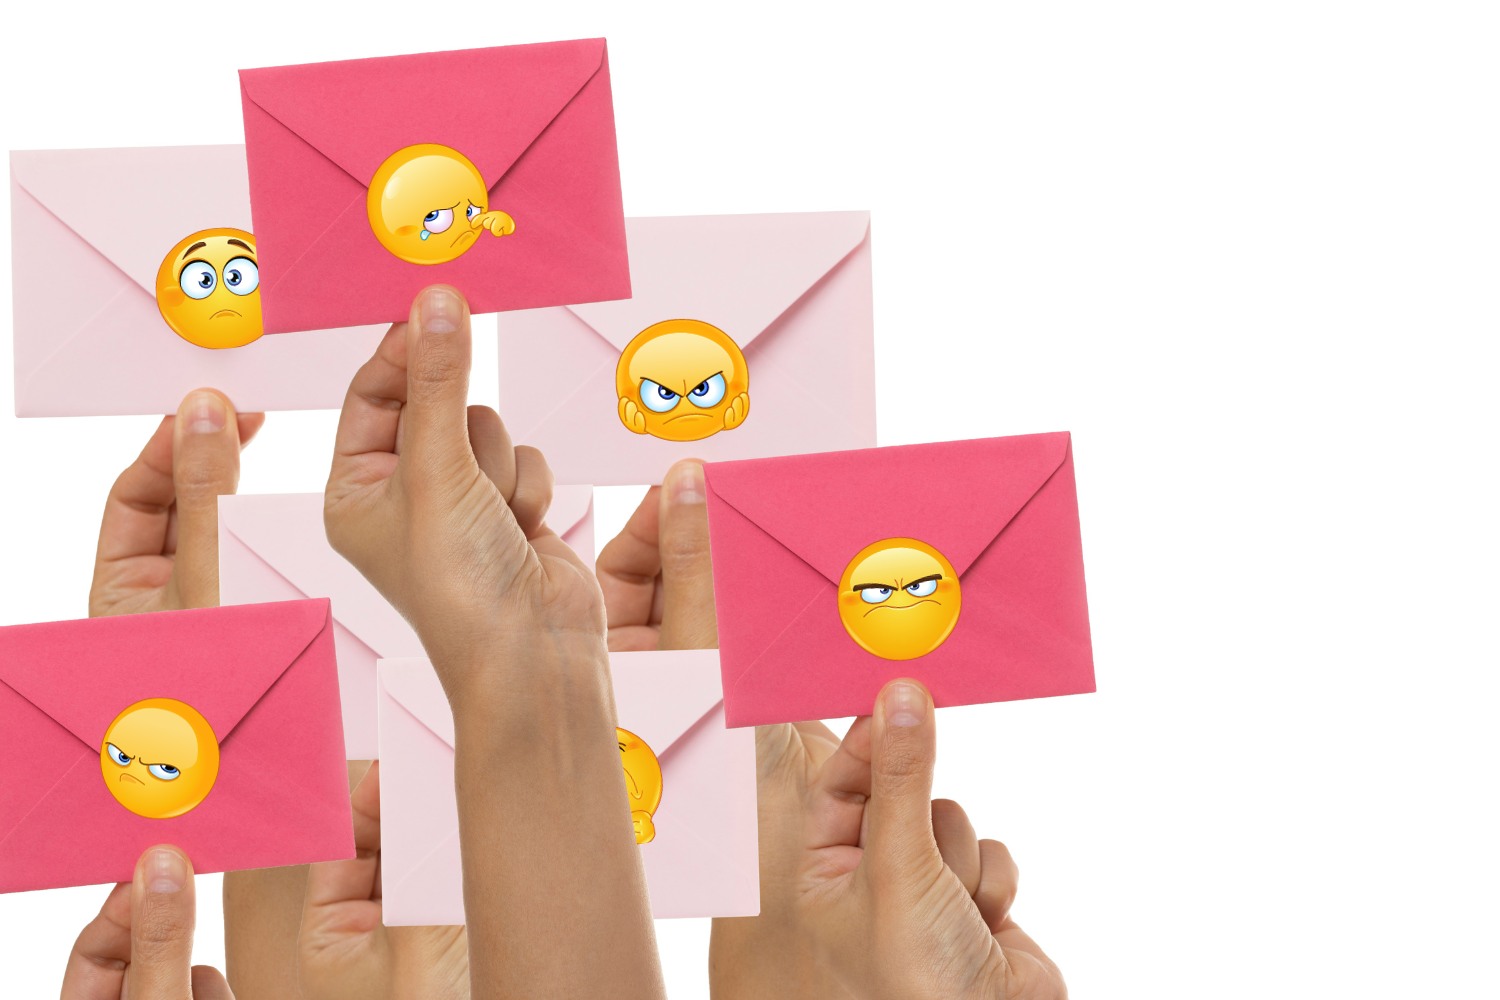 Lots of hands holding light pink and dark pink envelopes. Each envelope contains a sad or angry smiley